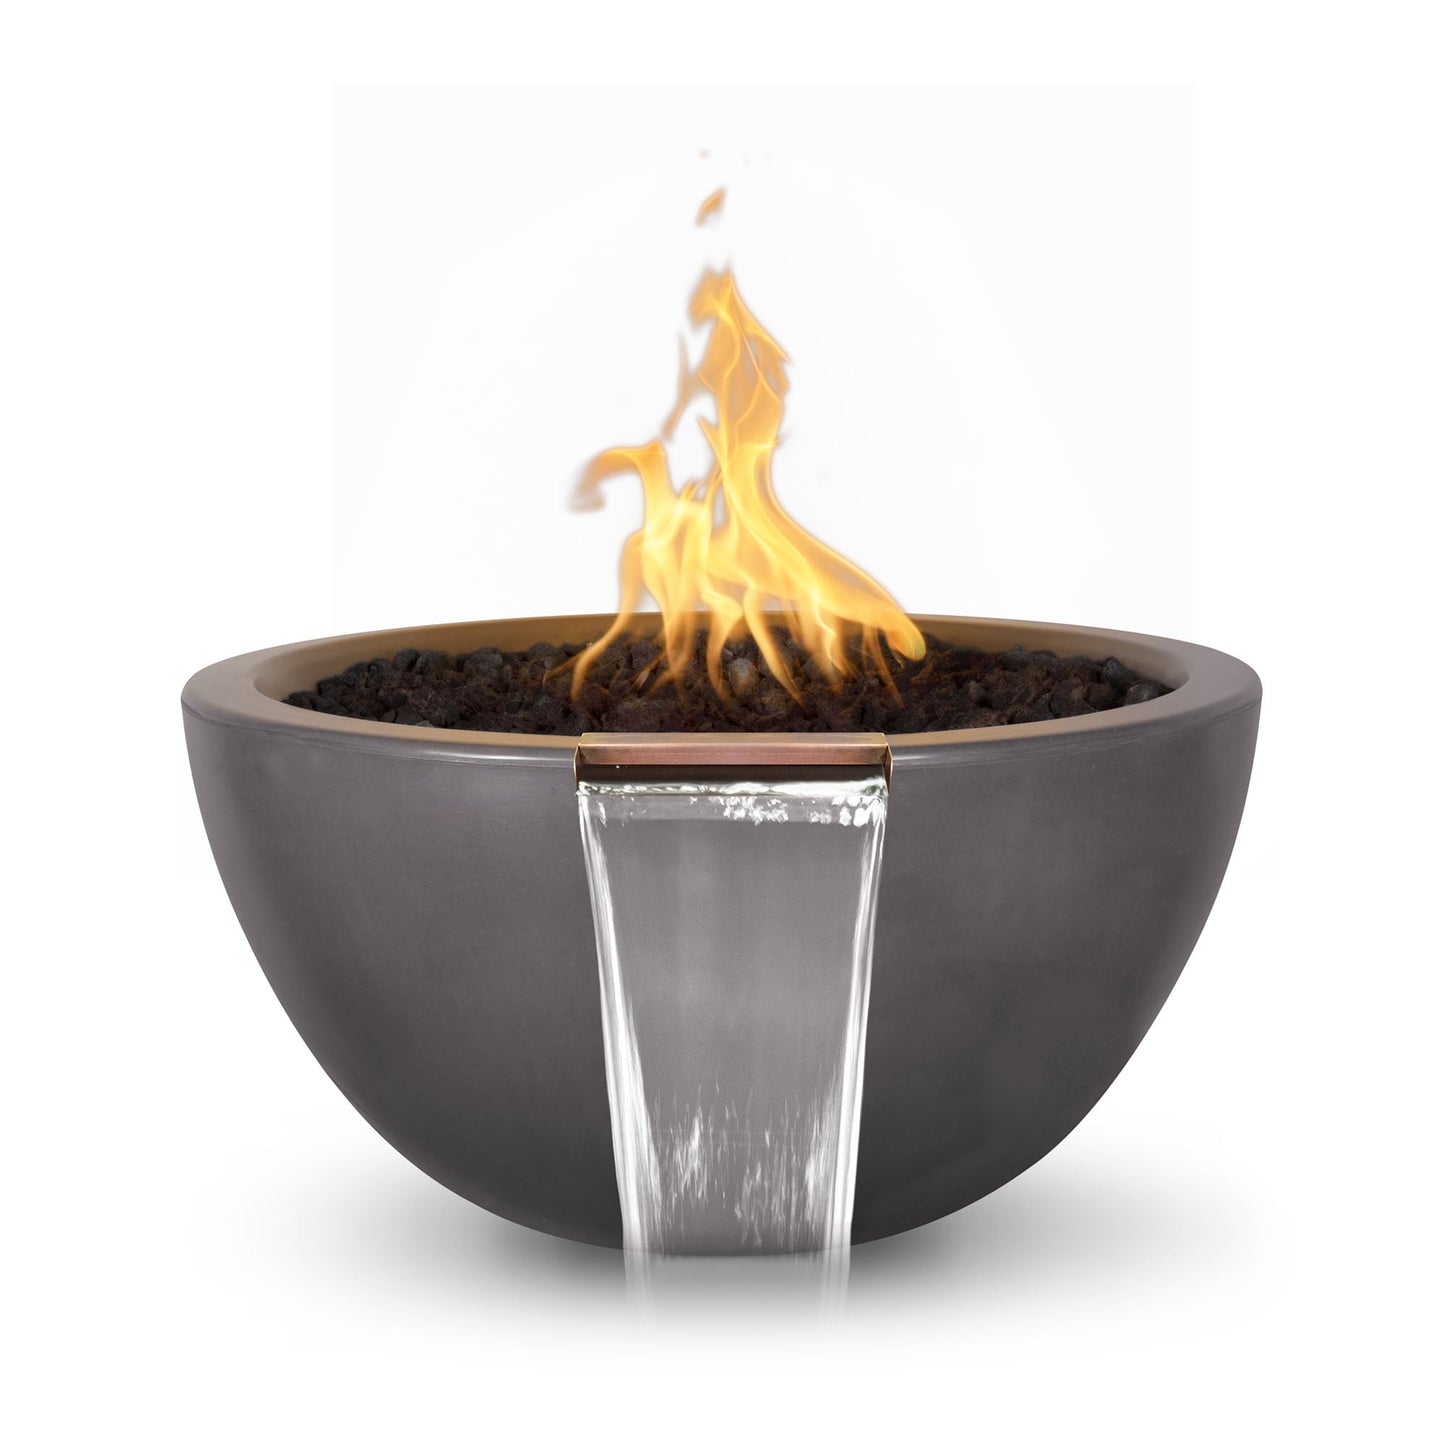 The Outdoor Plus Round Luna 30" Metallic Slate GFRC Concrete Natural Gas Fire & Water Bowl with Match Lit with Flame Sense Ignition